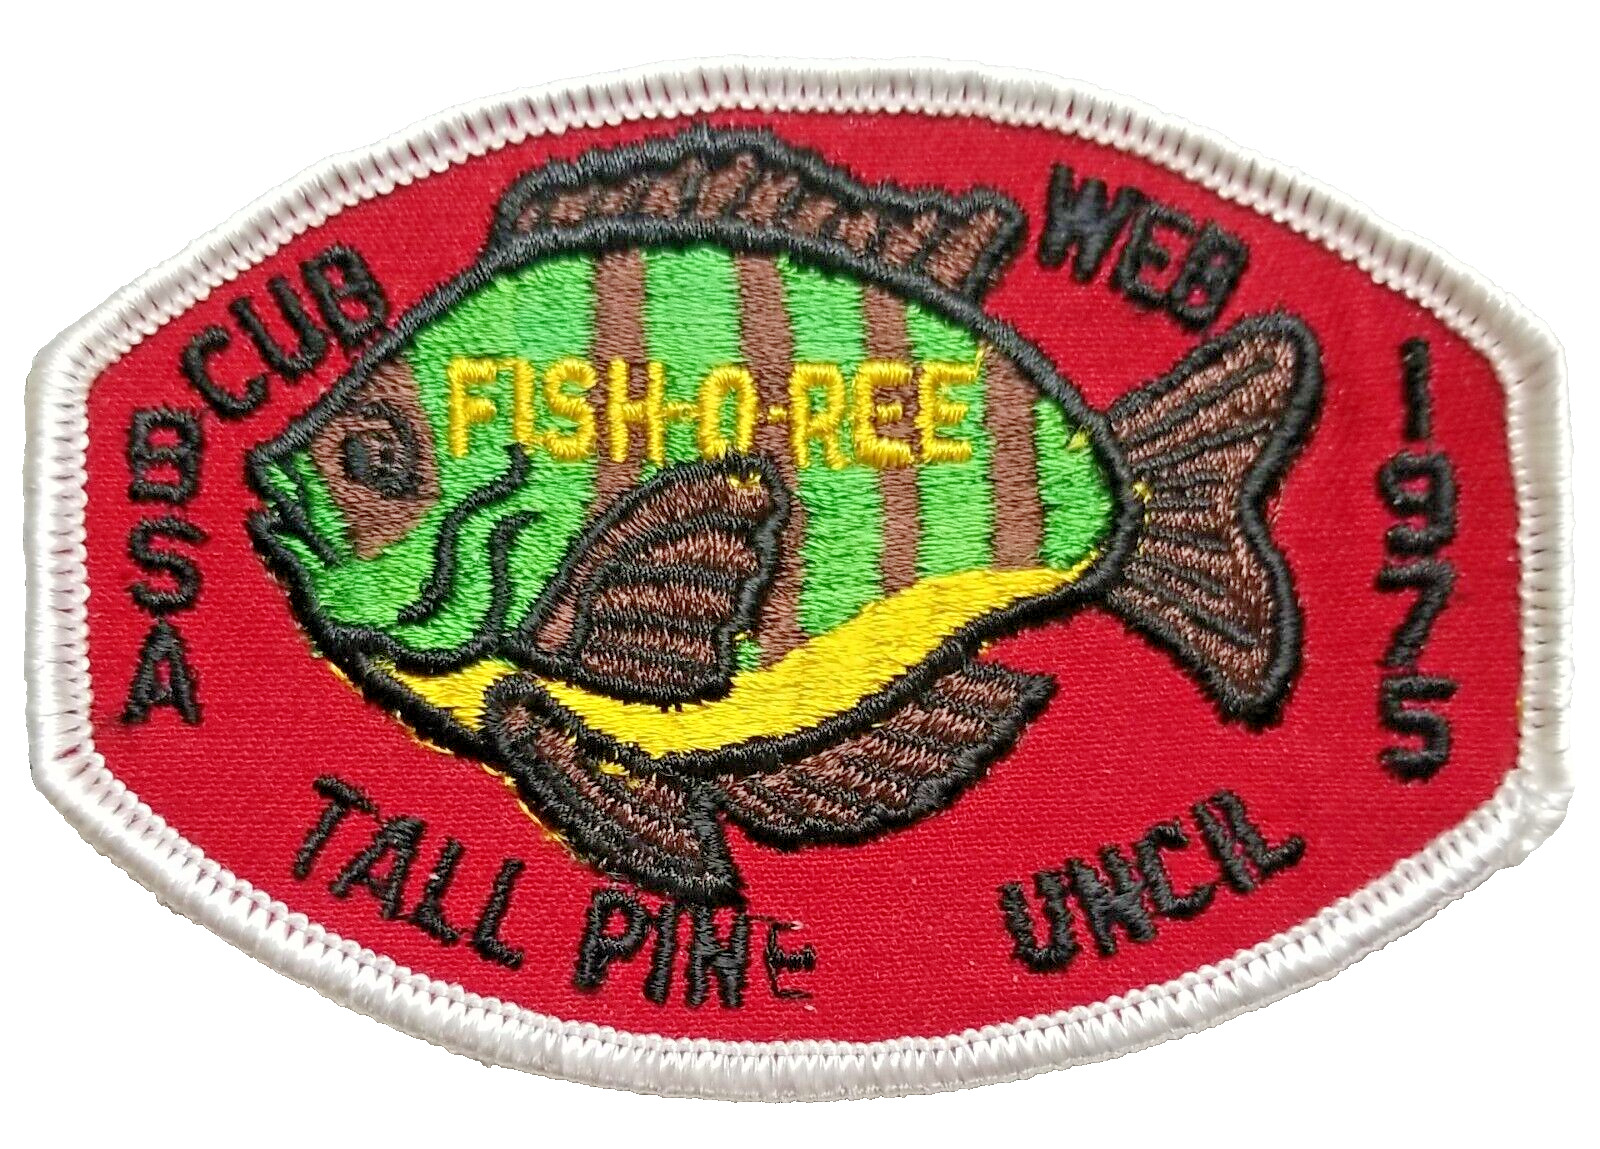 Vintage 1975 BSA 💥 TALL PINE COUNCIL FISH-O-REE 💥 BOY SCOUT PATCH STITCH ISSUE